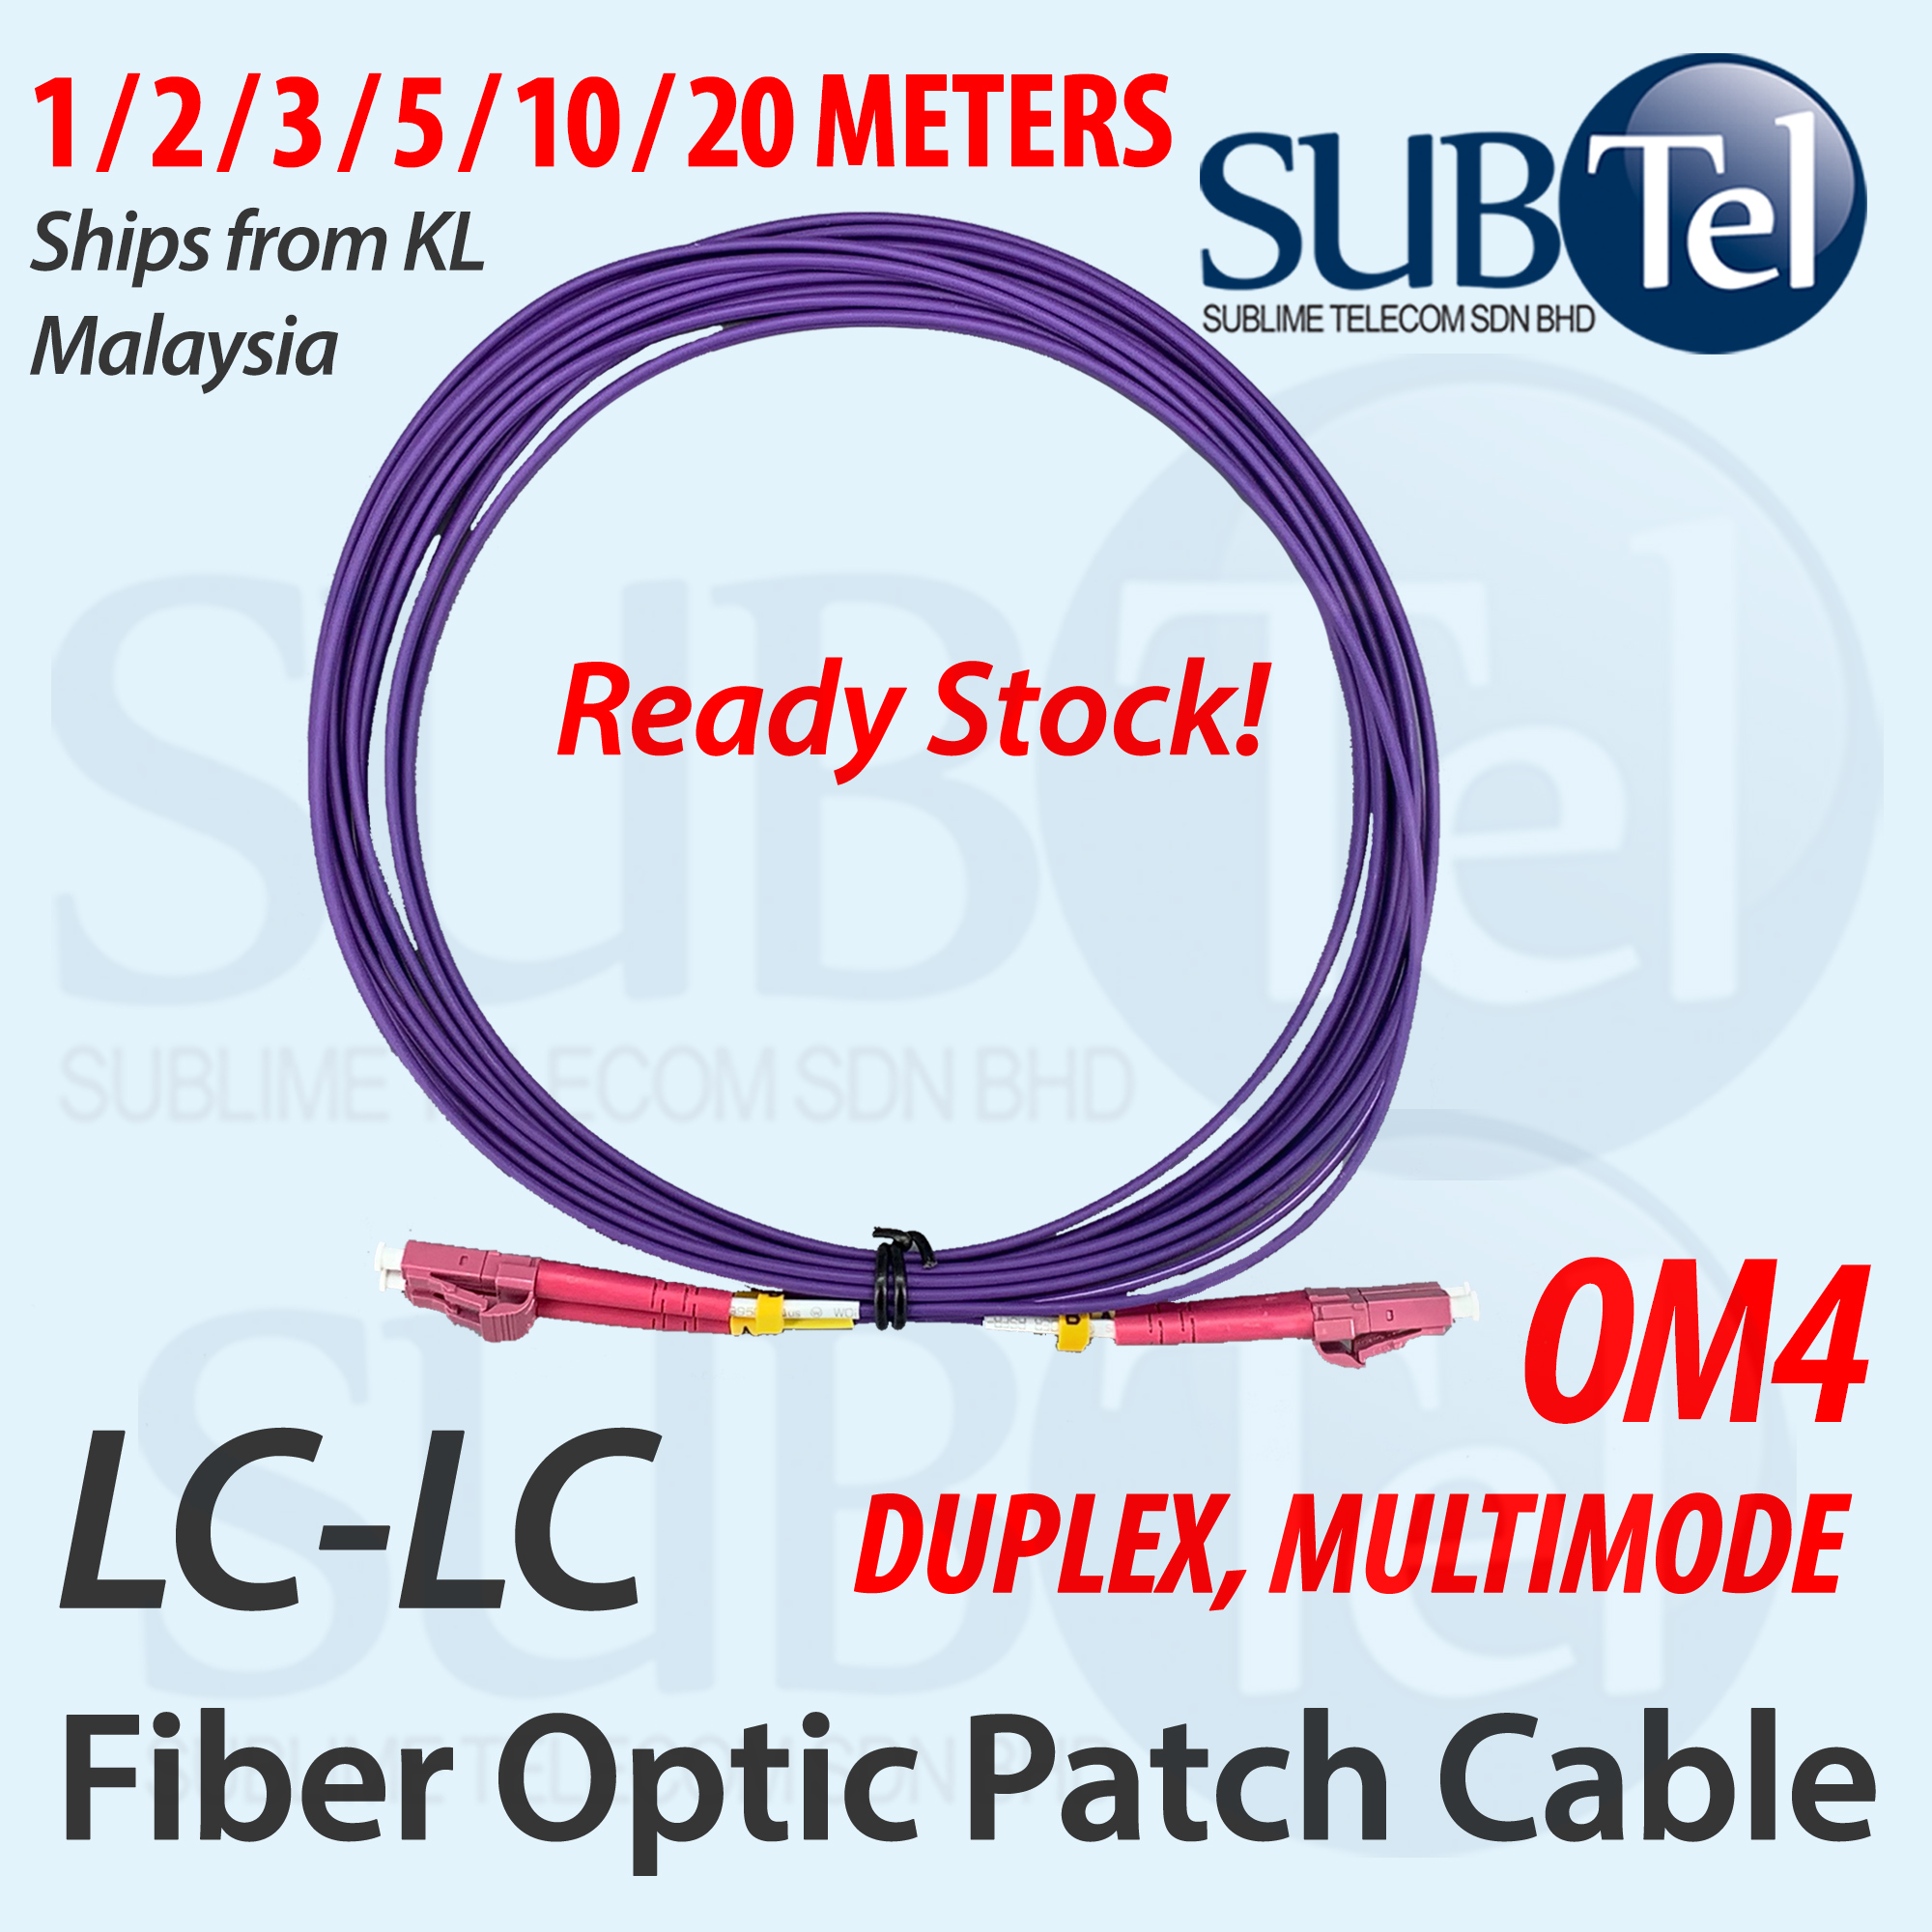 LC-LC OM4 Multi Mode Duplex Fiber Optic Patch Cord Cable LC to LC MM